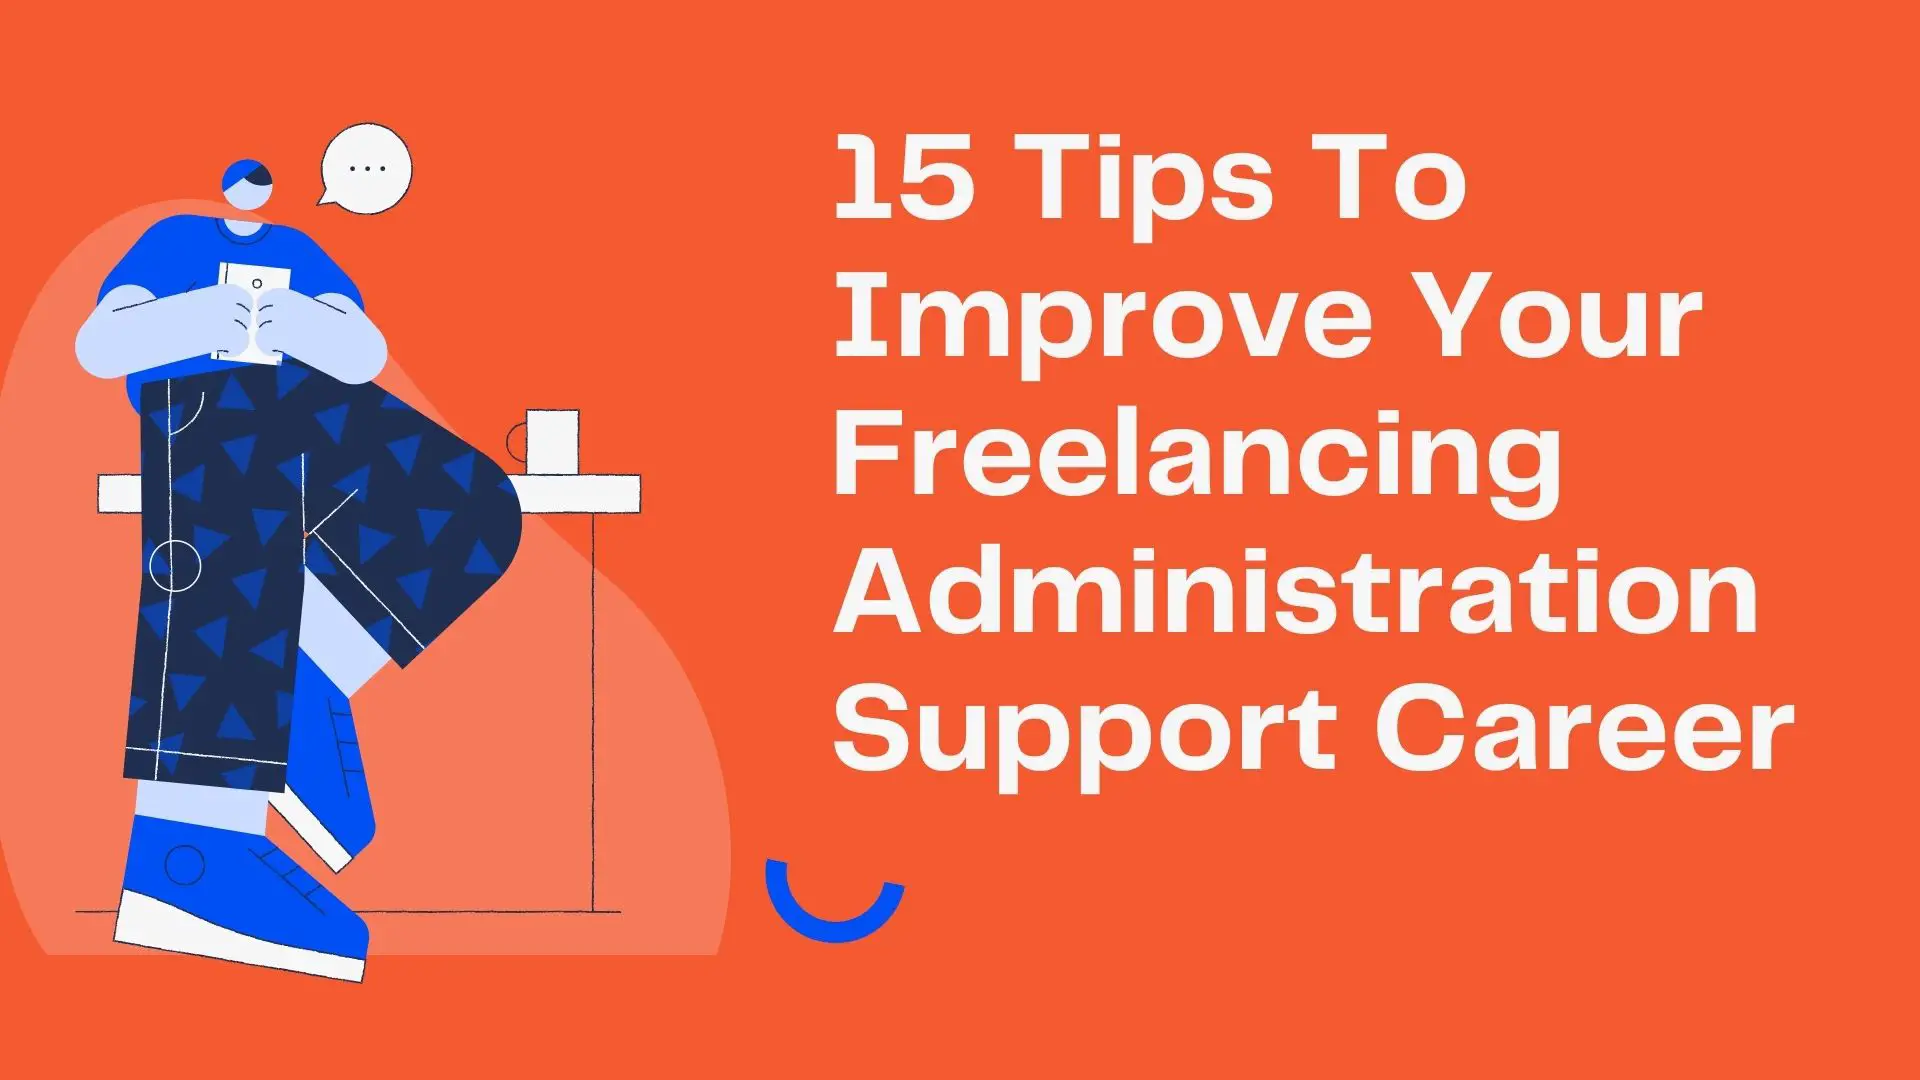 15 Tips To Improve Your Freelancing Administration Support Career